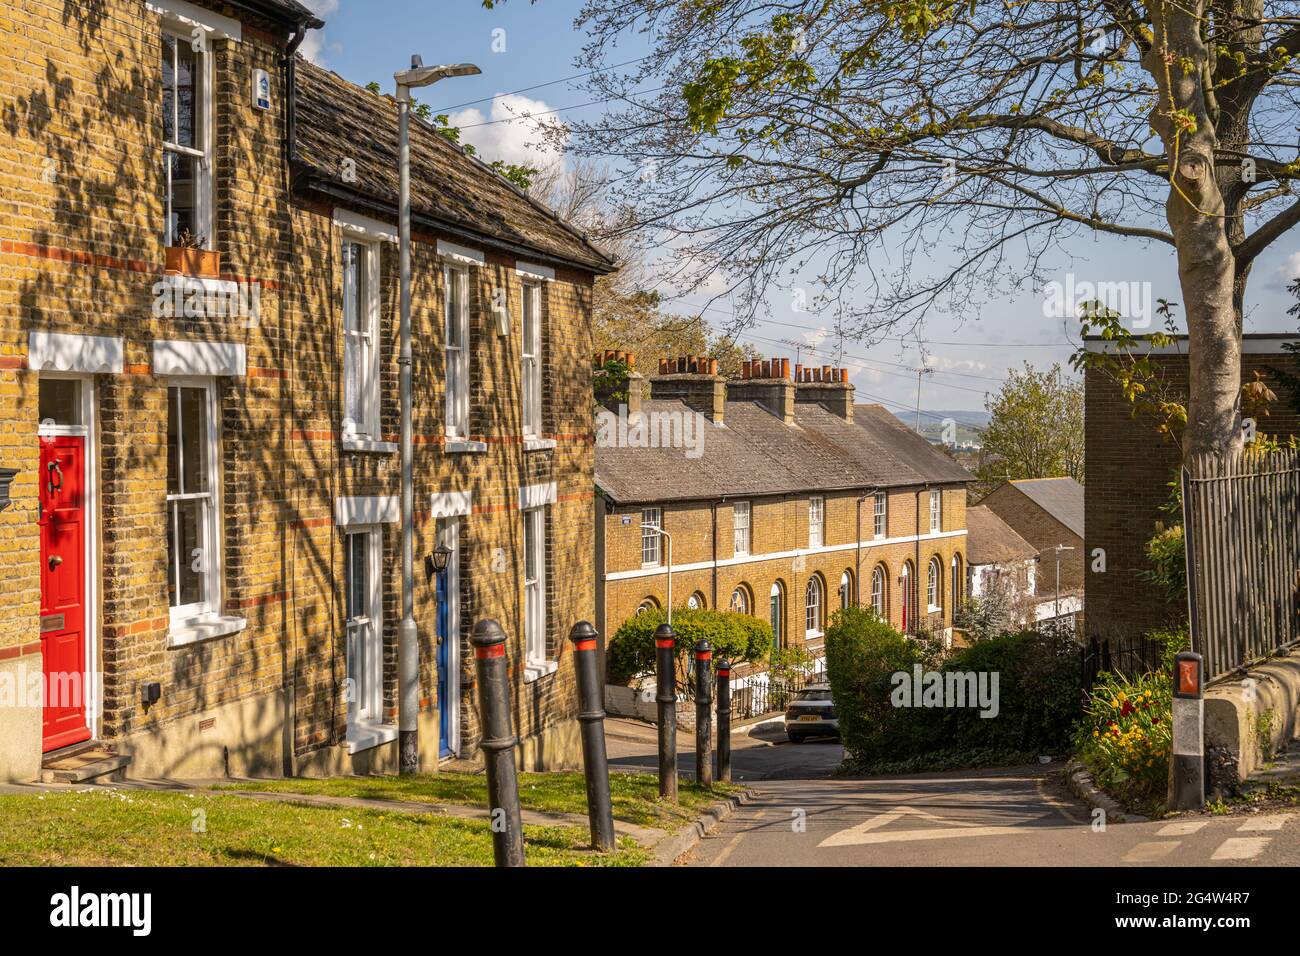 Houses in the Windmill hill conservation area Gravesend Kent. Stock Photo